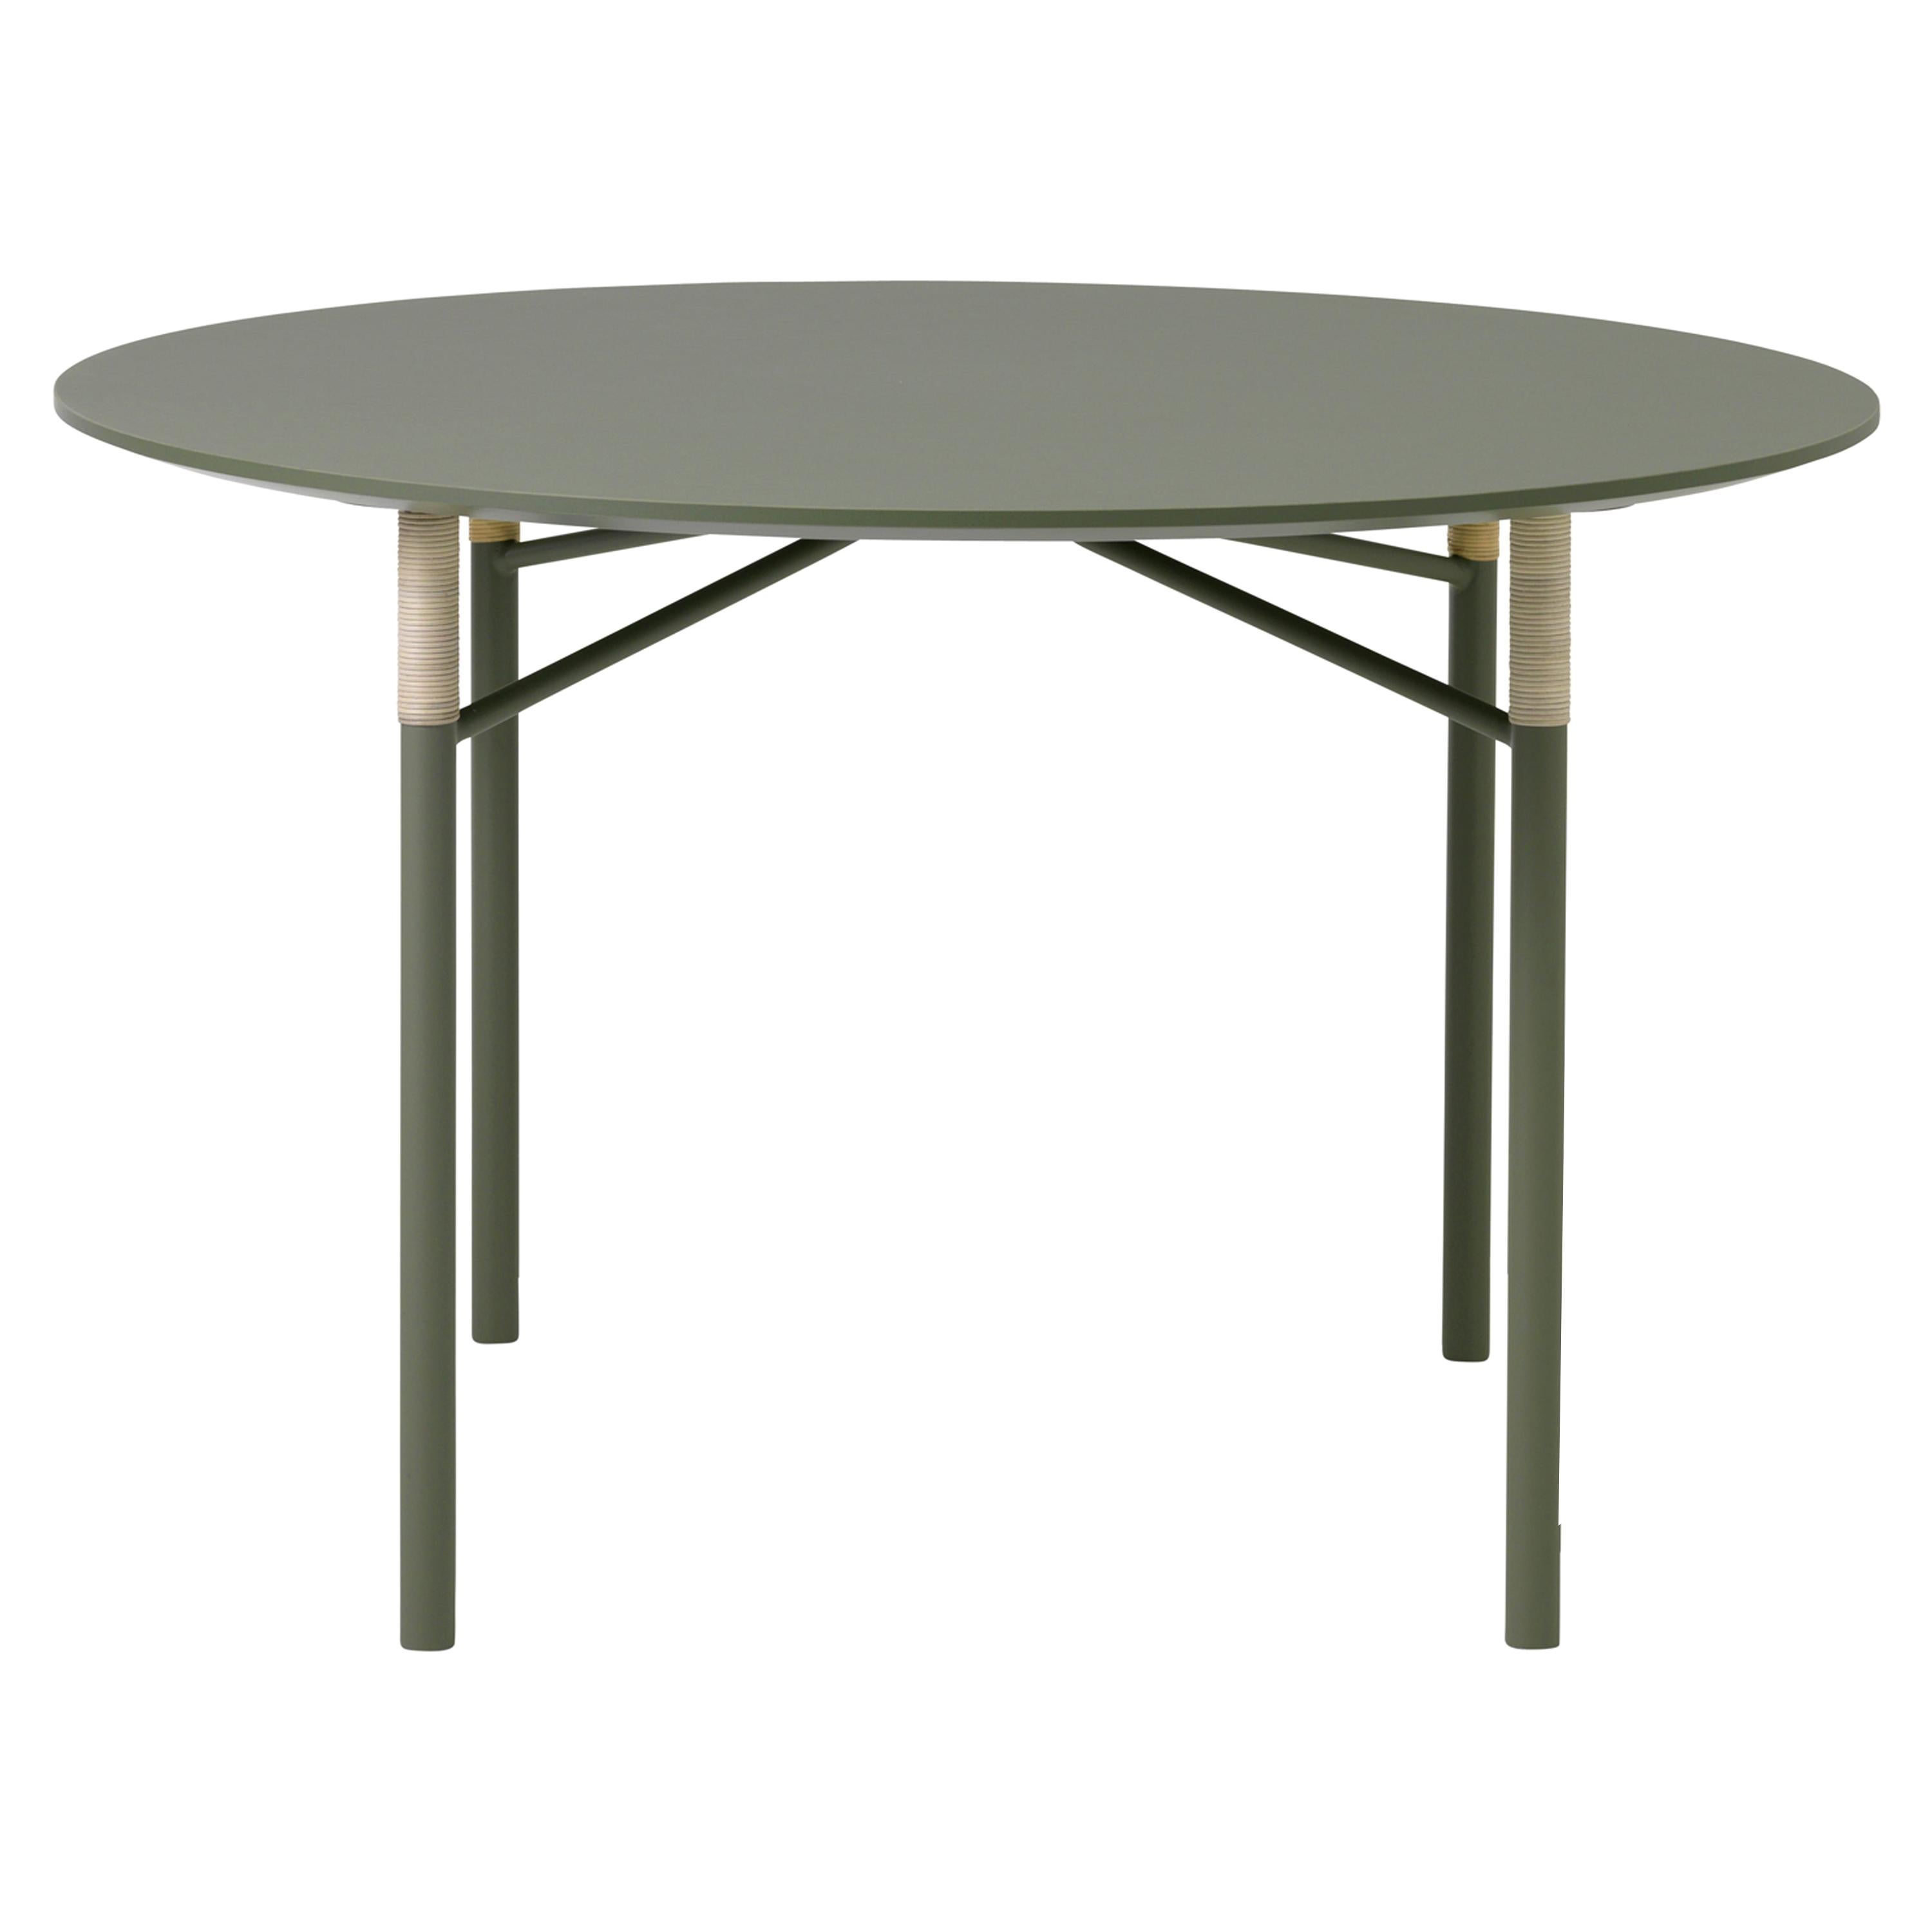 For Sale: Green (Light Green) Affinity Round Dining Table, by Halskov & Dalsgaard from Warm Nordic